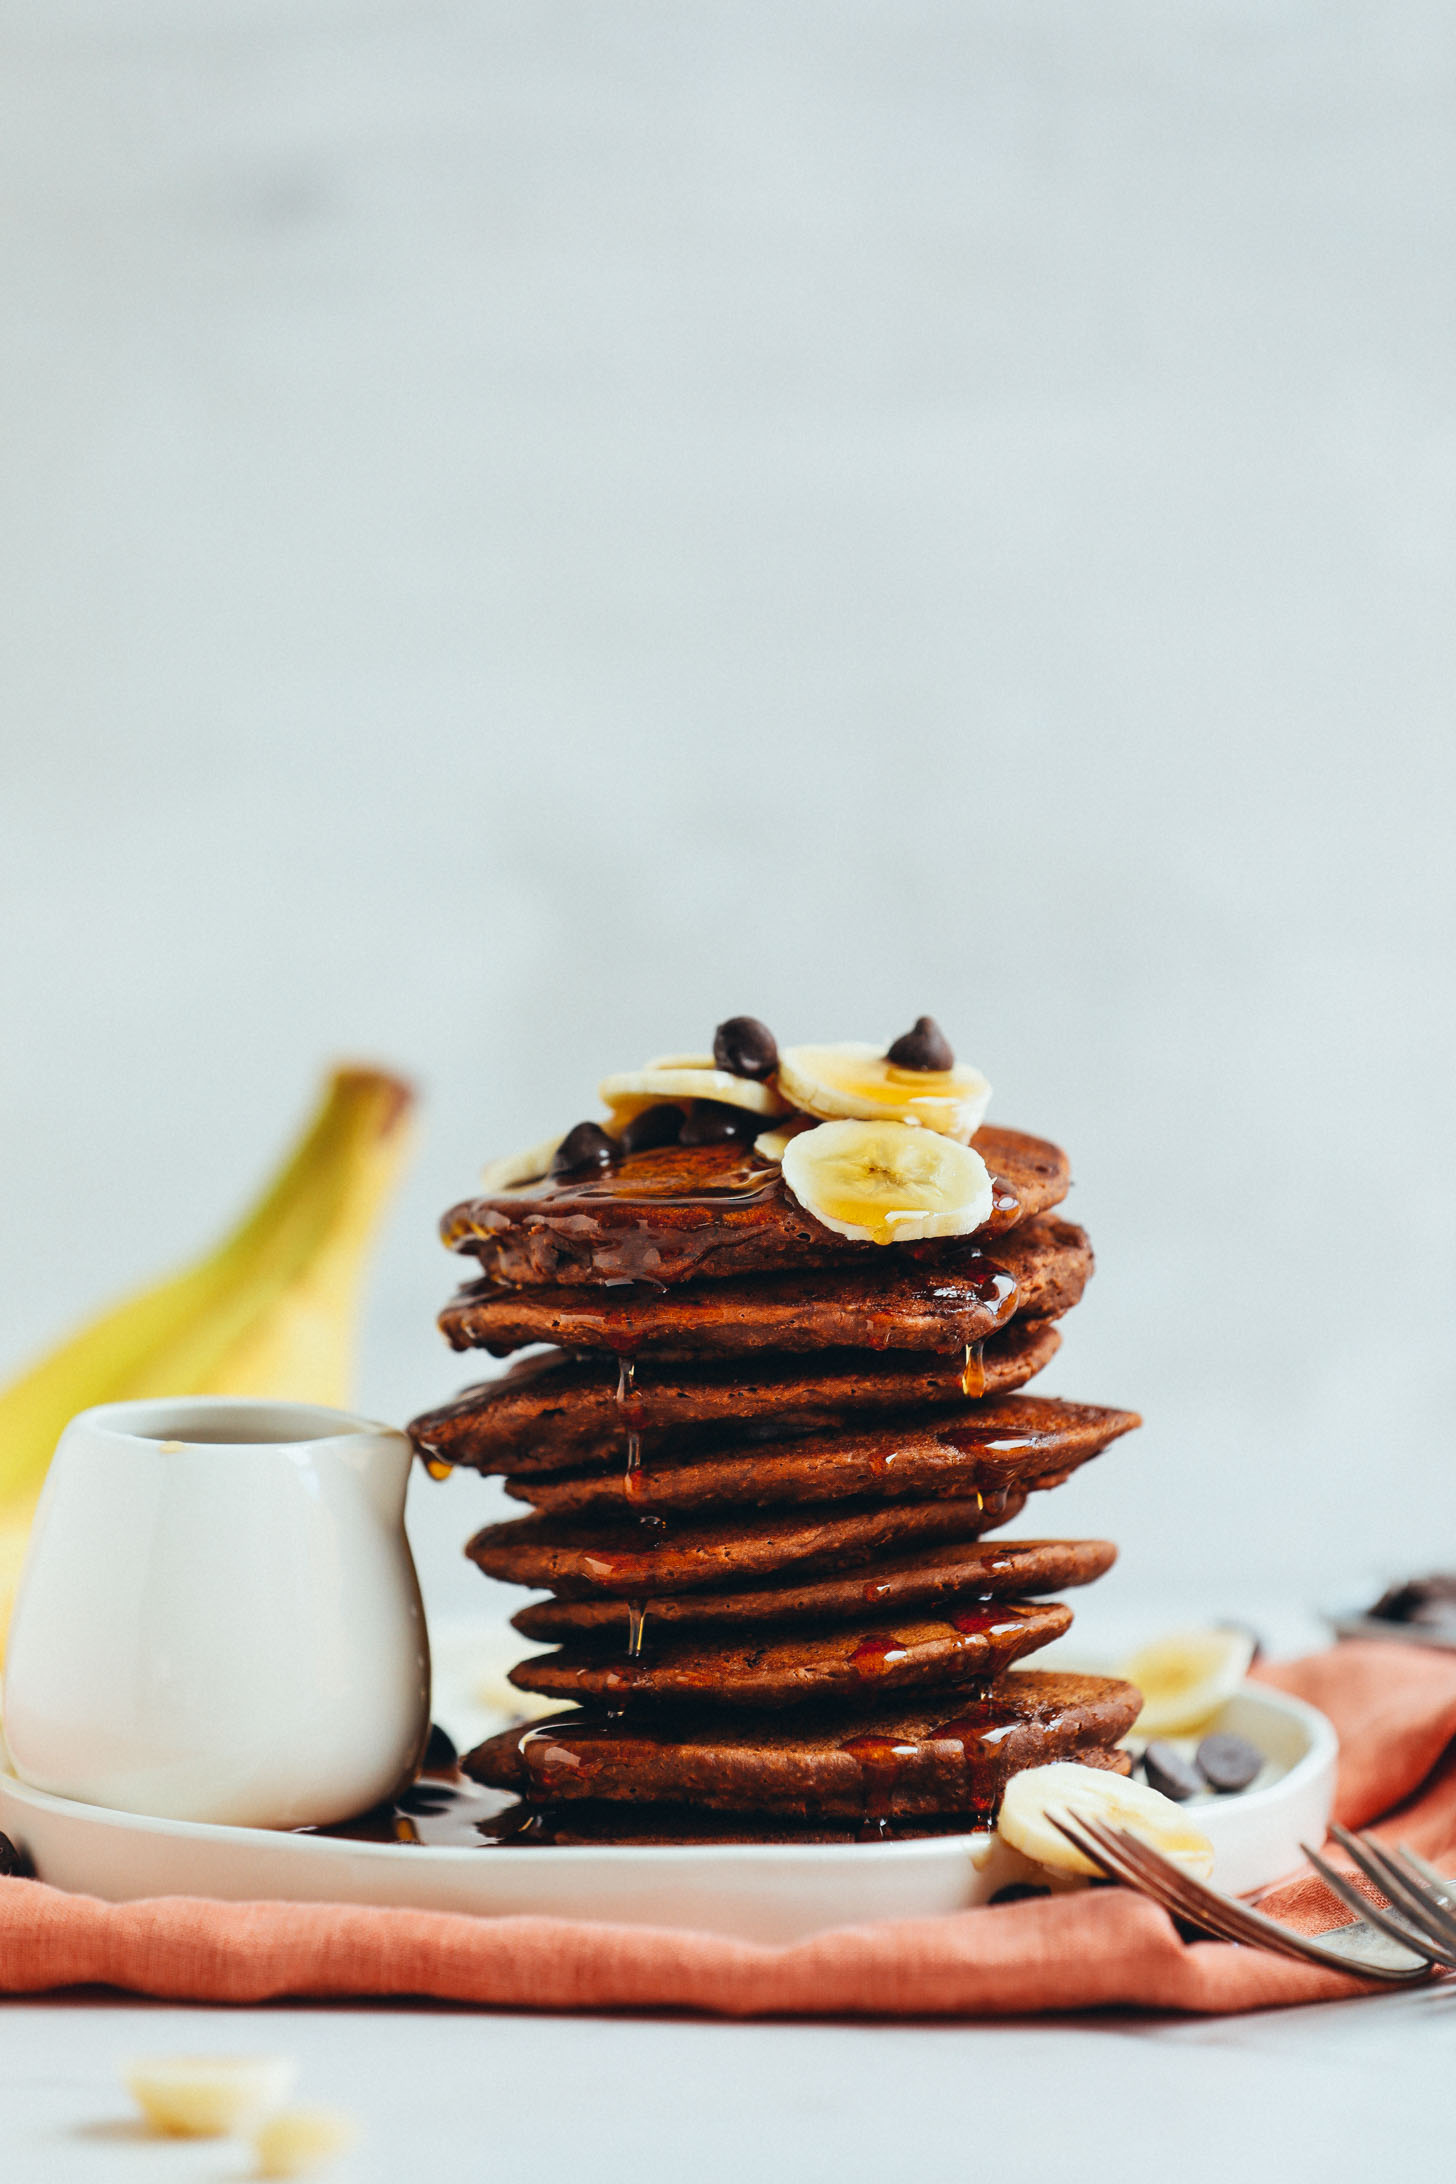 A stack of fluffy Vegan Chocolate Chocolate Chip Pancakes drizzled with syrup